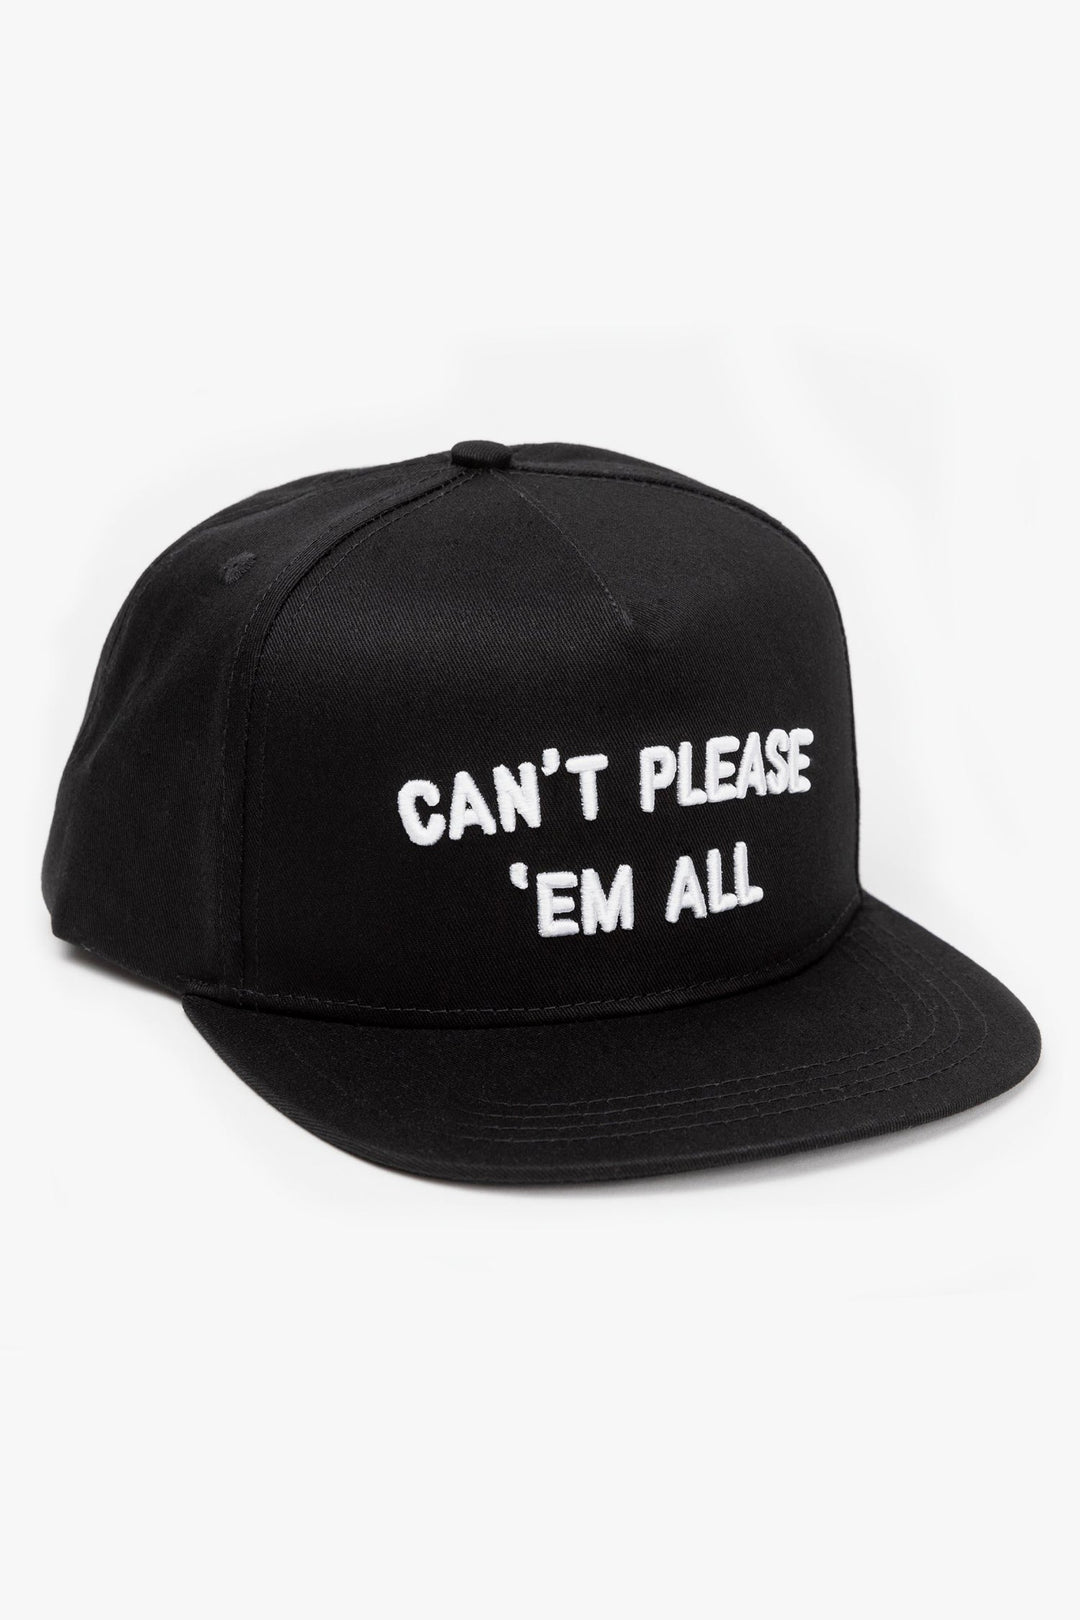 can't please them all hat - Indestructible MFG